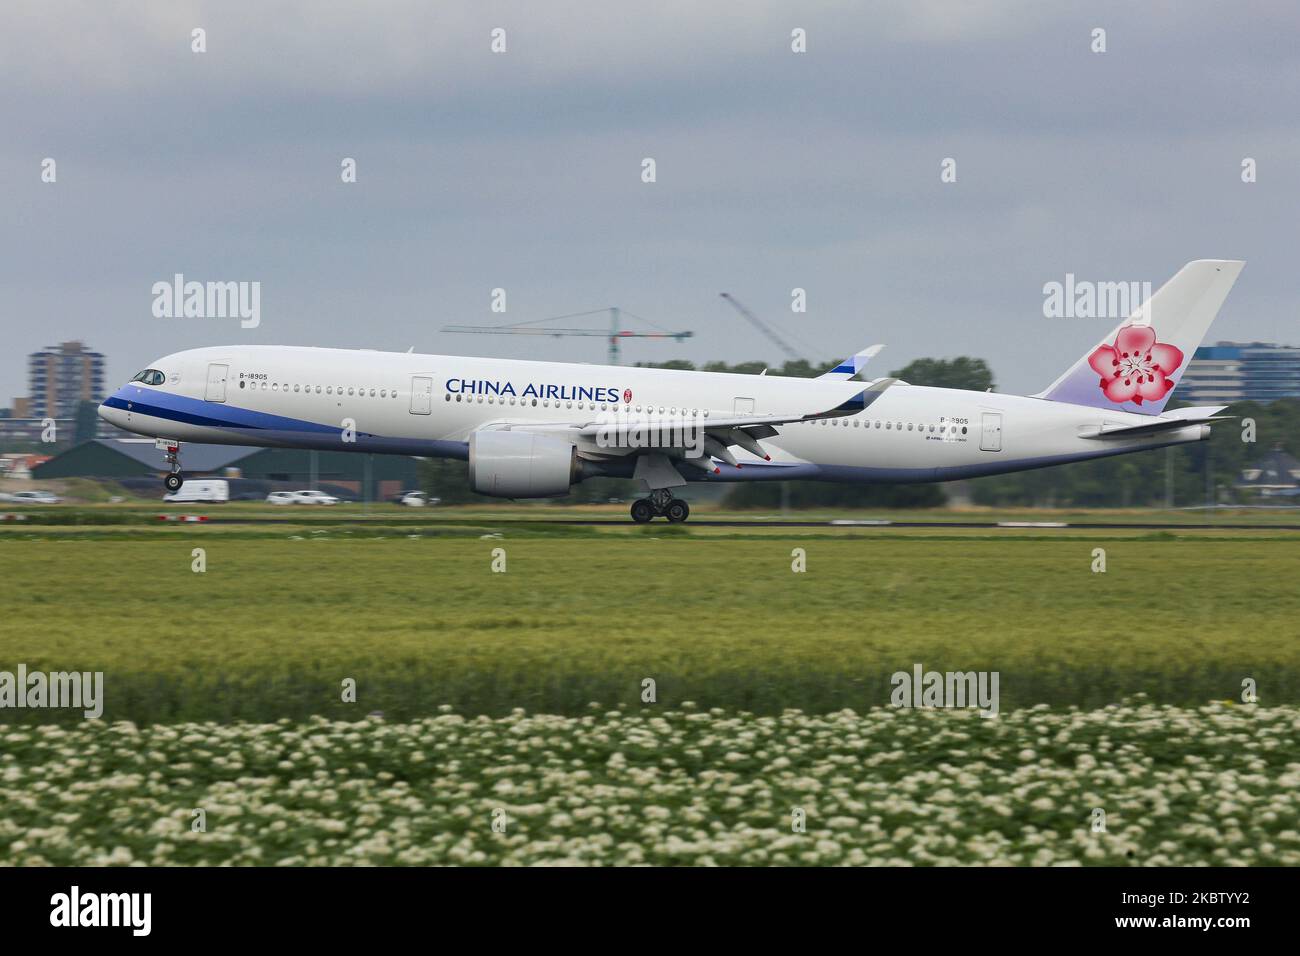 China Airlines Airbus A350-900 aircraft as seen on final approach flying, landing and touching down at Amsterdam Schiphol AMS EHAM International Airport in the Netherlands at Polderbaan runway. The Airbus A350 airplane is a new, modern, advanced, environmentally friendly, fuel-efficient wide-body plane, a long haul airliner is powered by 2x RR Rolls Royce Jet Engines and registration B-18905. The Chinese carrier China Airlines CI CAL DYNASTY is the national carrier of the Republic of China ( Taiwan ), member of SkyTeam aviation alliance, with headquarters in Taipei Taoyuan Airport in Asia. Jul Stock Photo